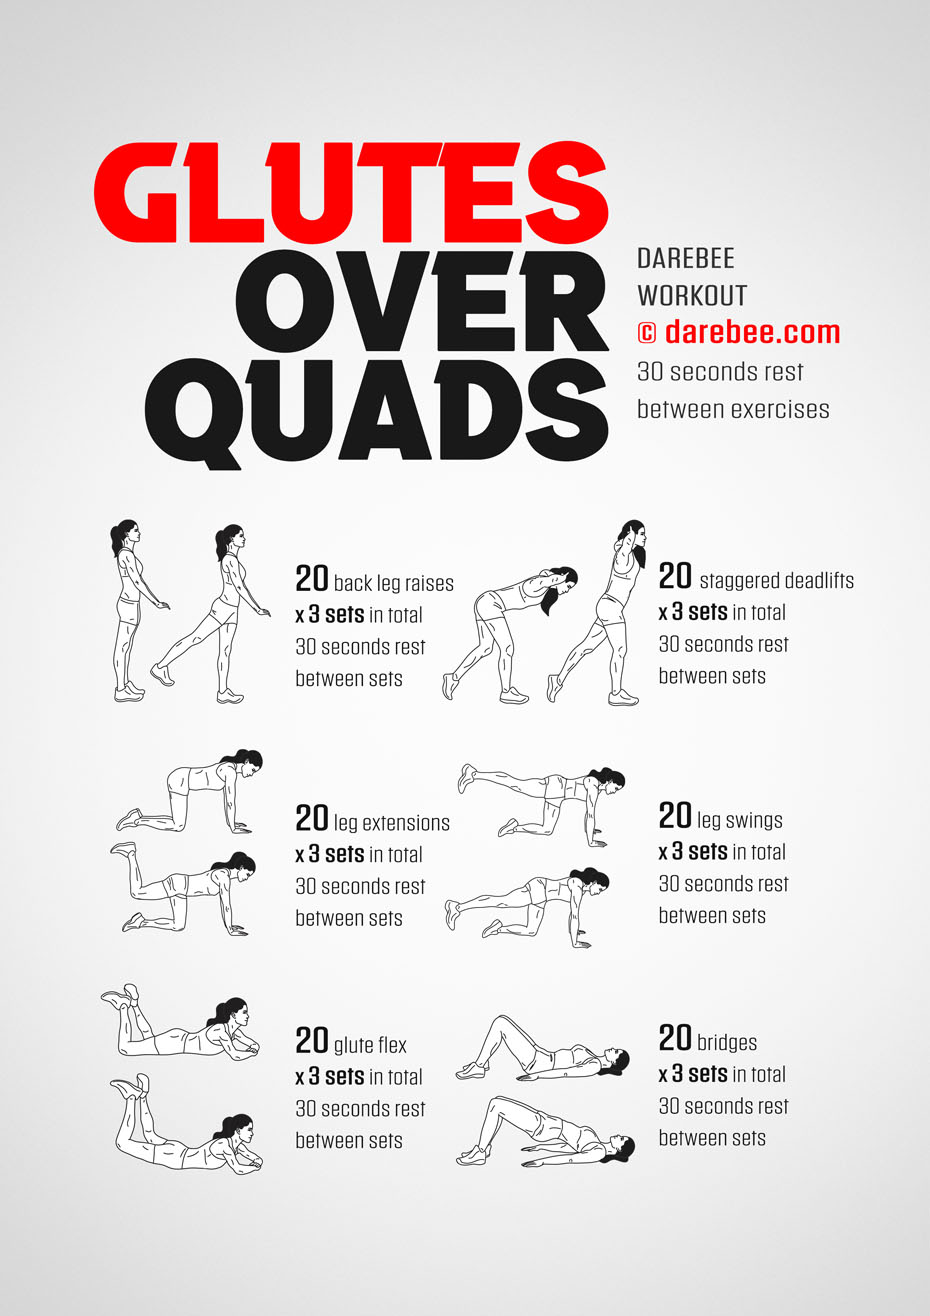 Glutes Over Quads is a Darebee home fitness workout that targets the glutes specifically, helping them become stronger and more responsive to us.